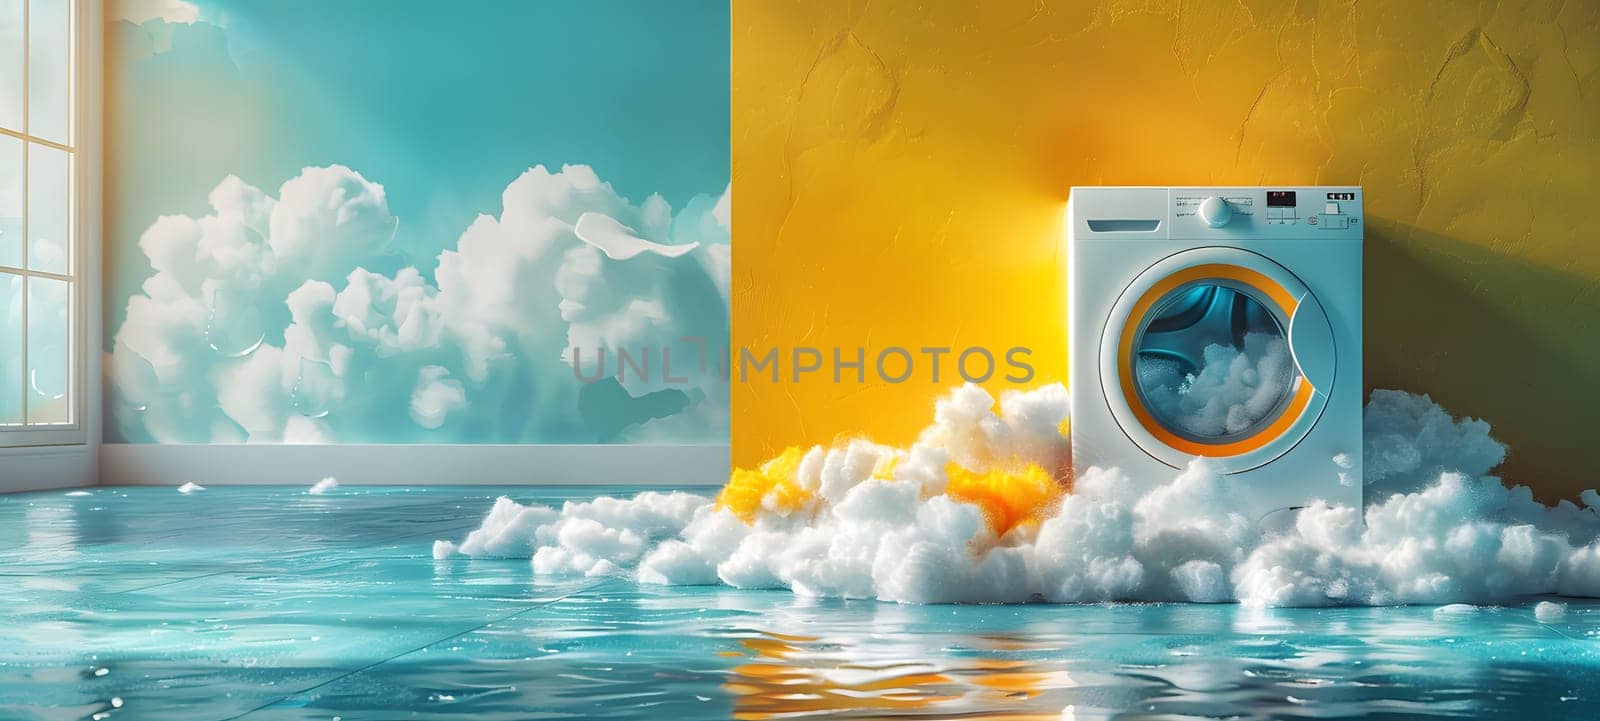 A washing machine floats in a room filled with water, surrounded by clouds. The liquid world creates an art piece blending sky, paint, aqua, and cumulus clouds on the horizon